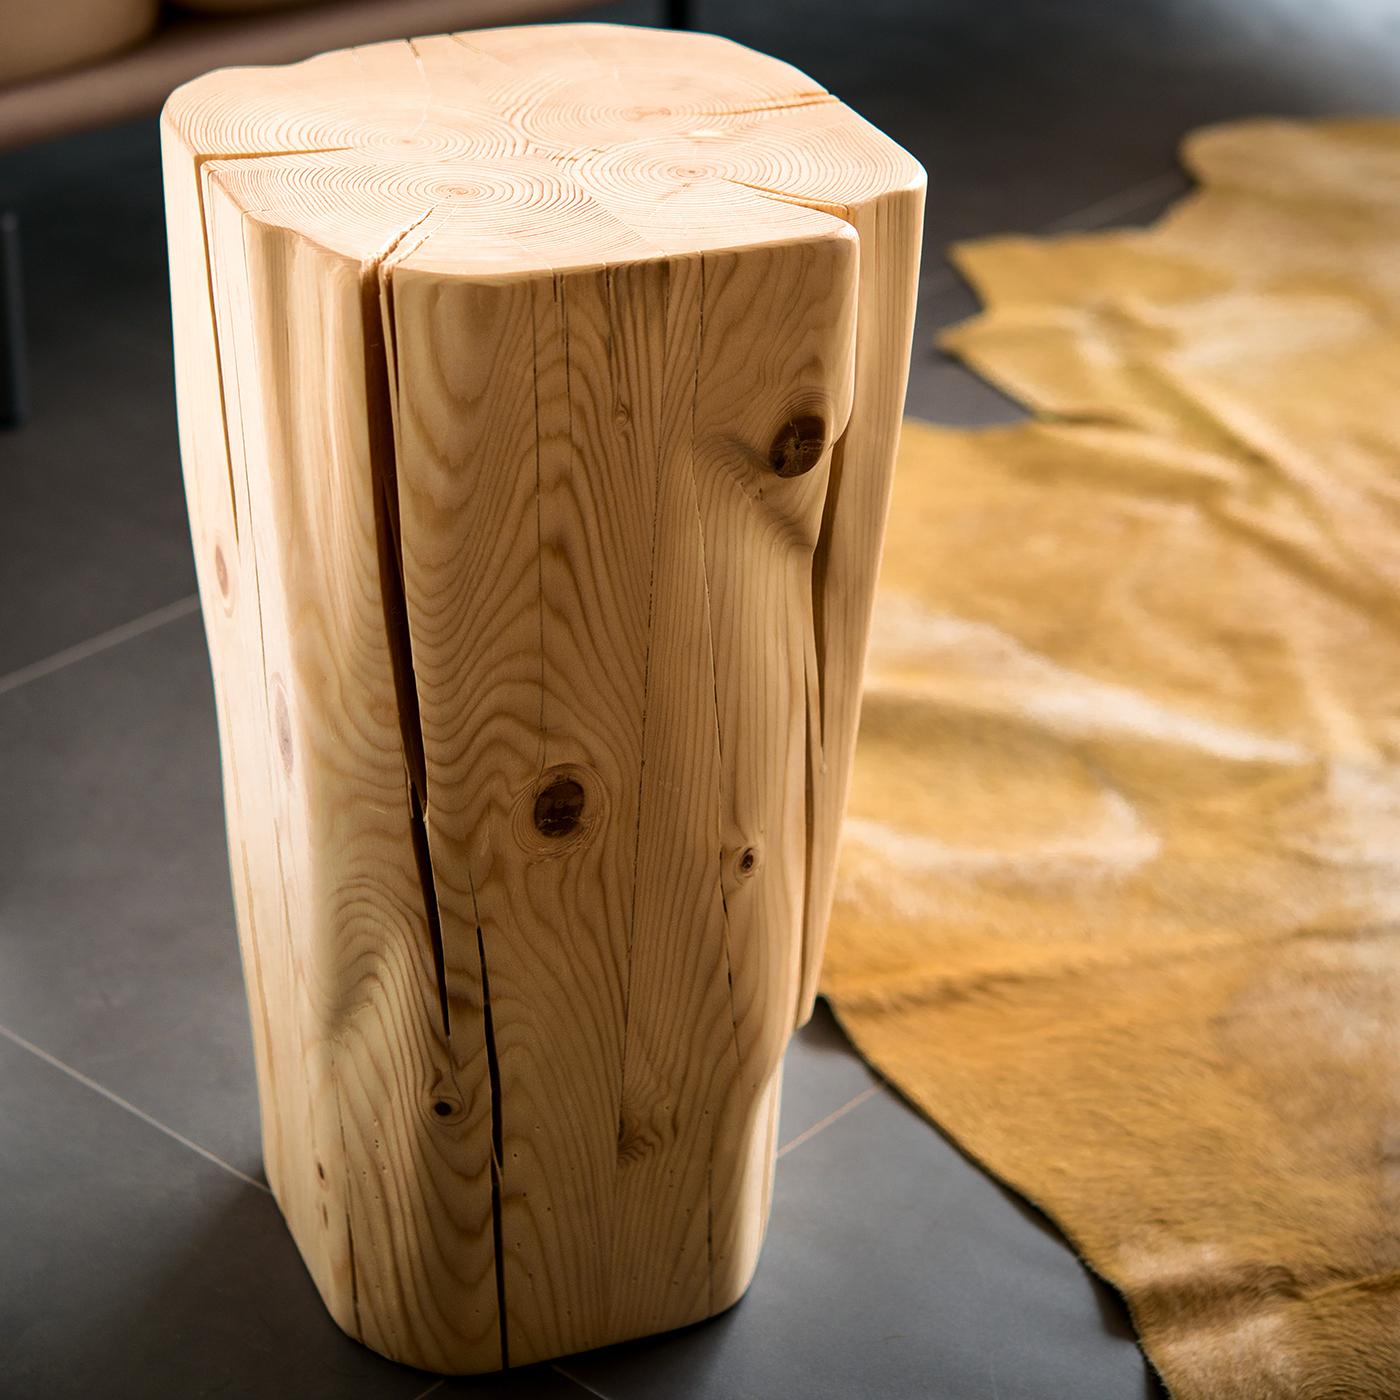 Showcasing the exquisite natural wood grain, this stool is a unique piece of functional decor suitable for rustic-modern interiors. Reduced to rigorous geometric lines, the slightly tapered shape is carved entirely by hand exalting the intrinsic